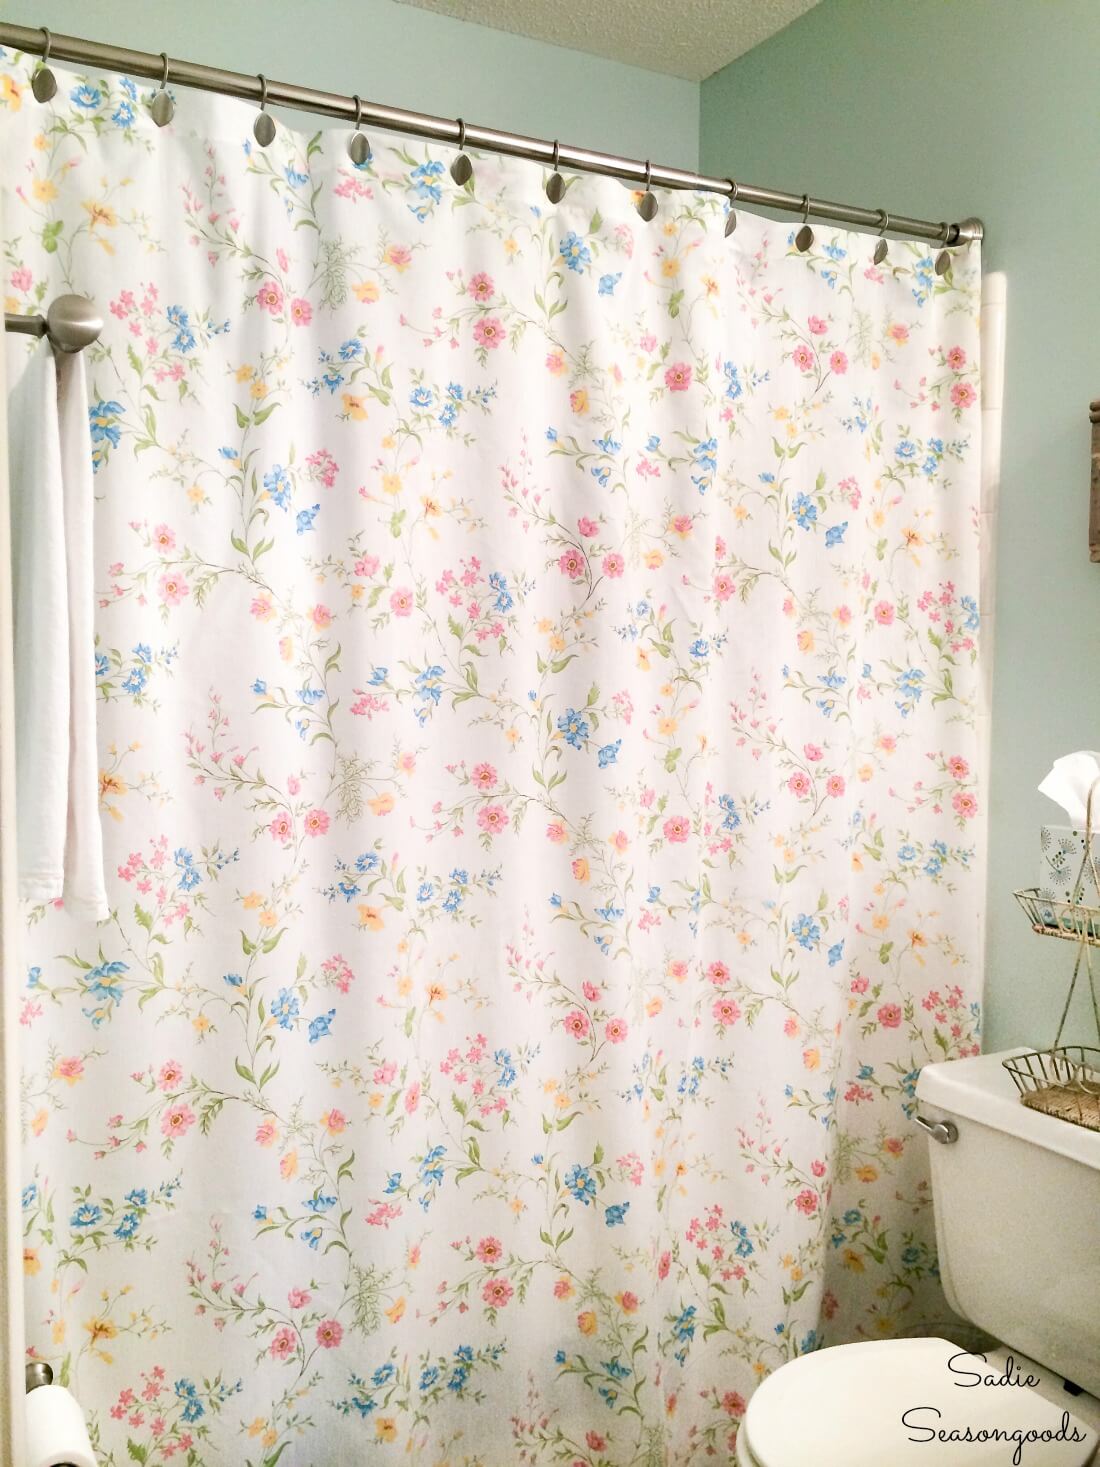 In Repurposing & Decorating With Vintage Linens, this is a vintage sheet turned into a shower curtain